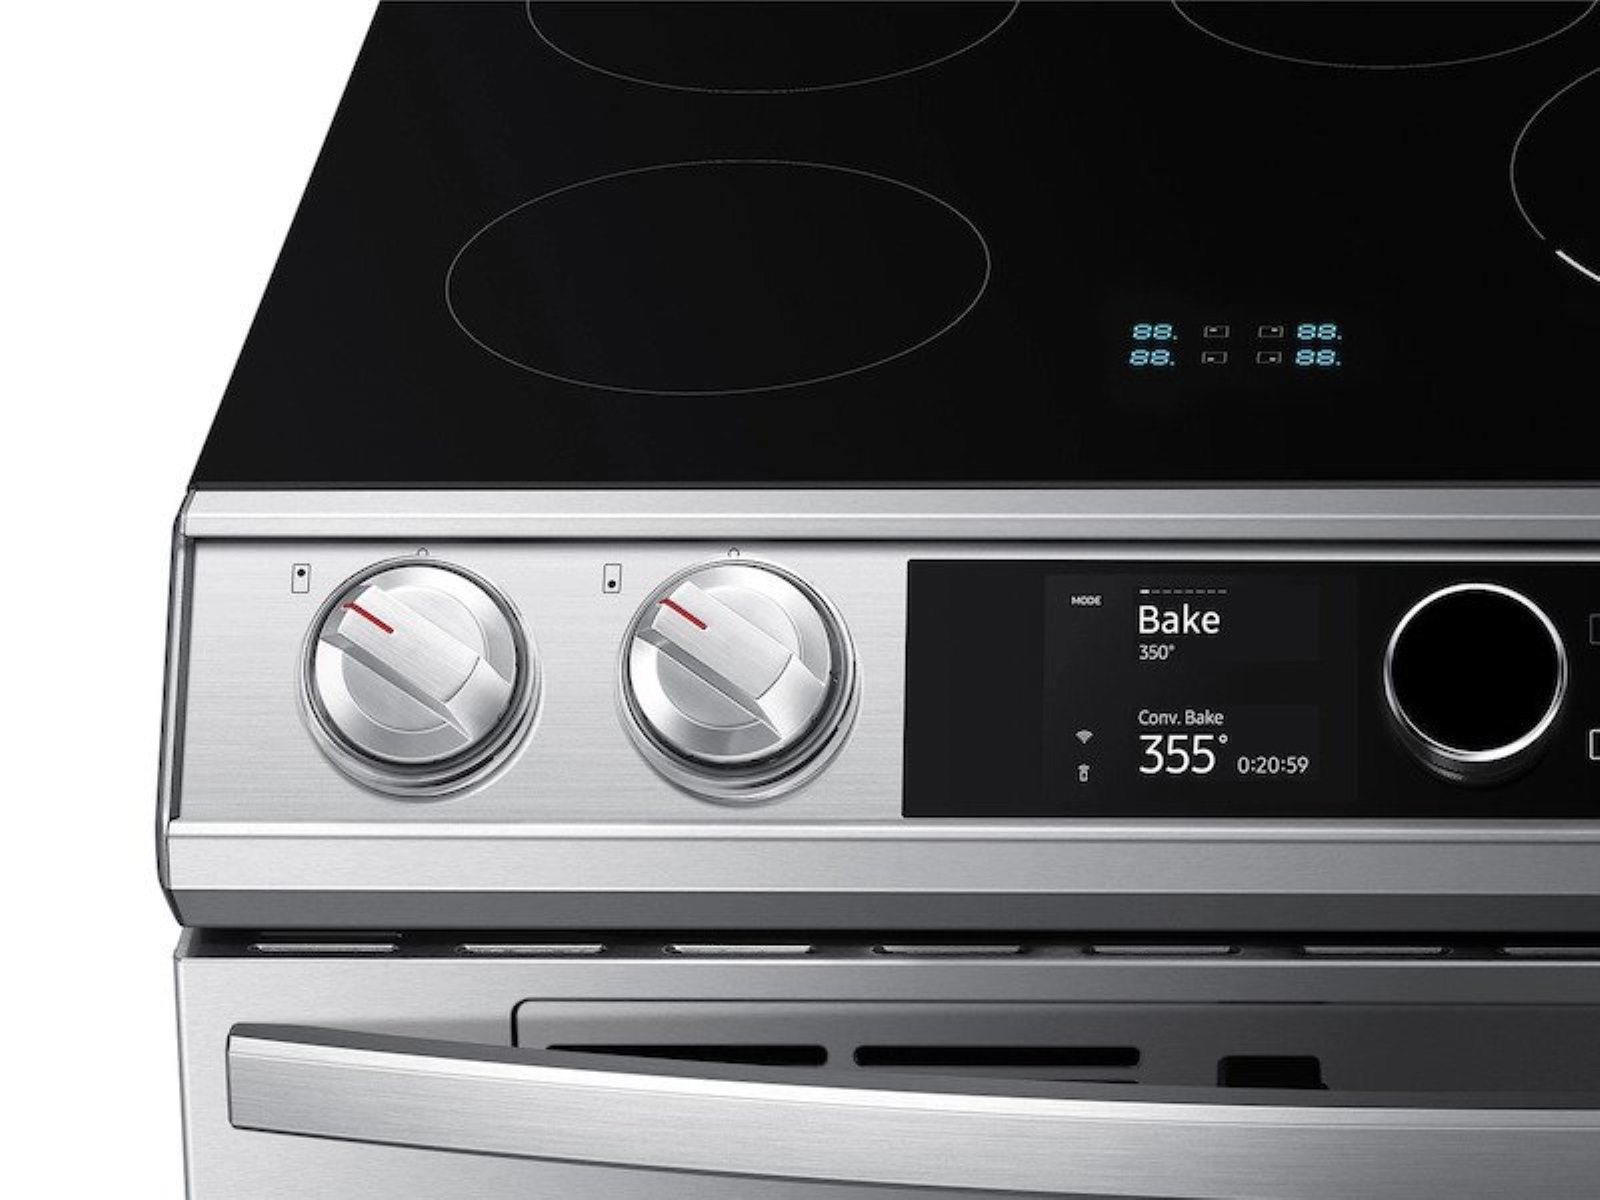 How To Fix The Error Code E-28 For Samsung Induction Range